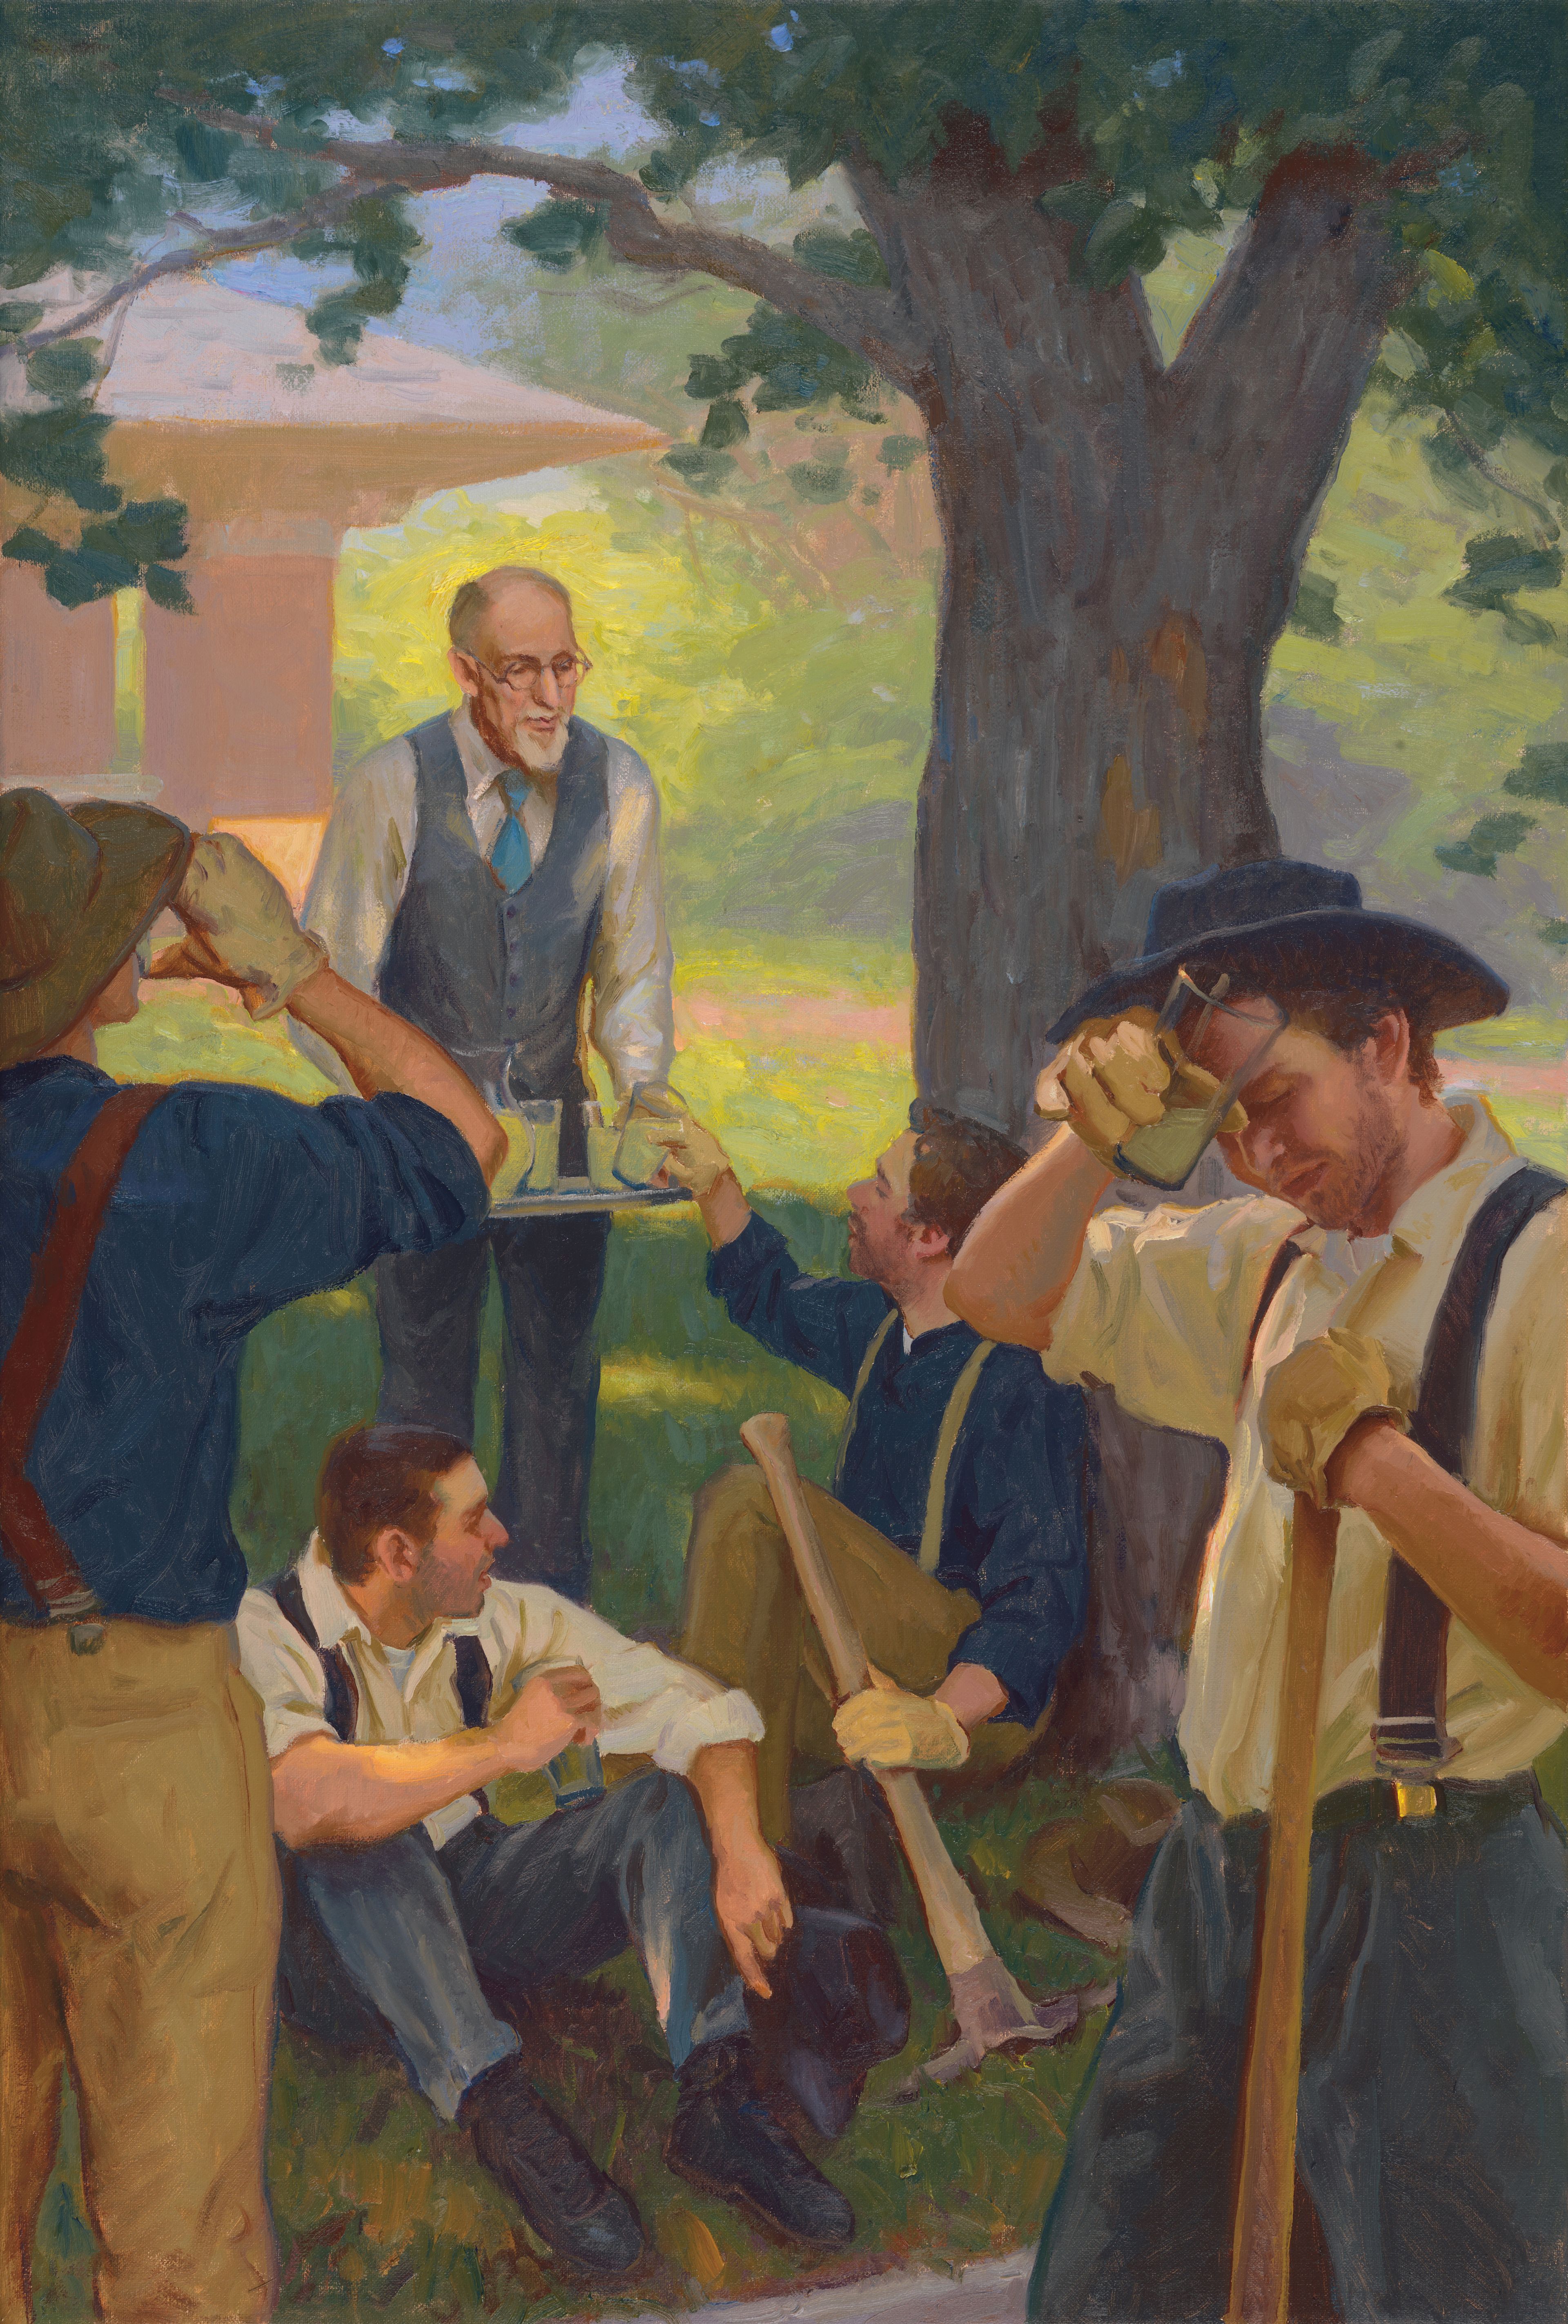 A depiction of President George Albert Smith serving lemonade to workers outside his home on a hot day. Teachings of Presidents of the Church: George Albert Smith (2011), 224